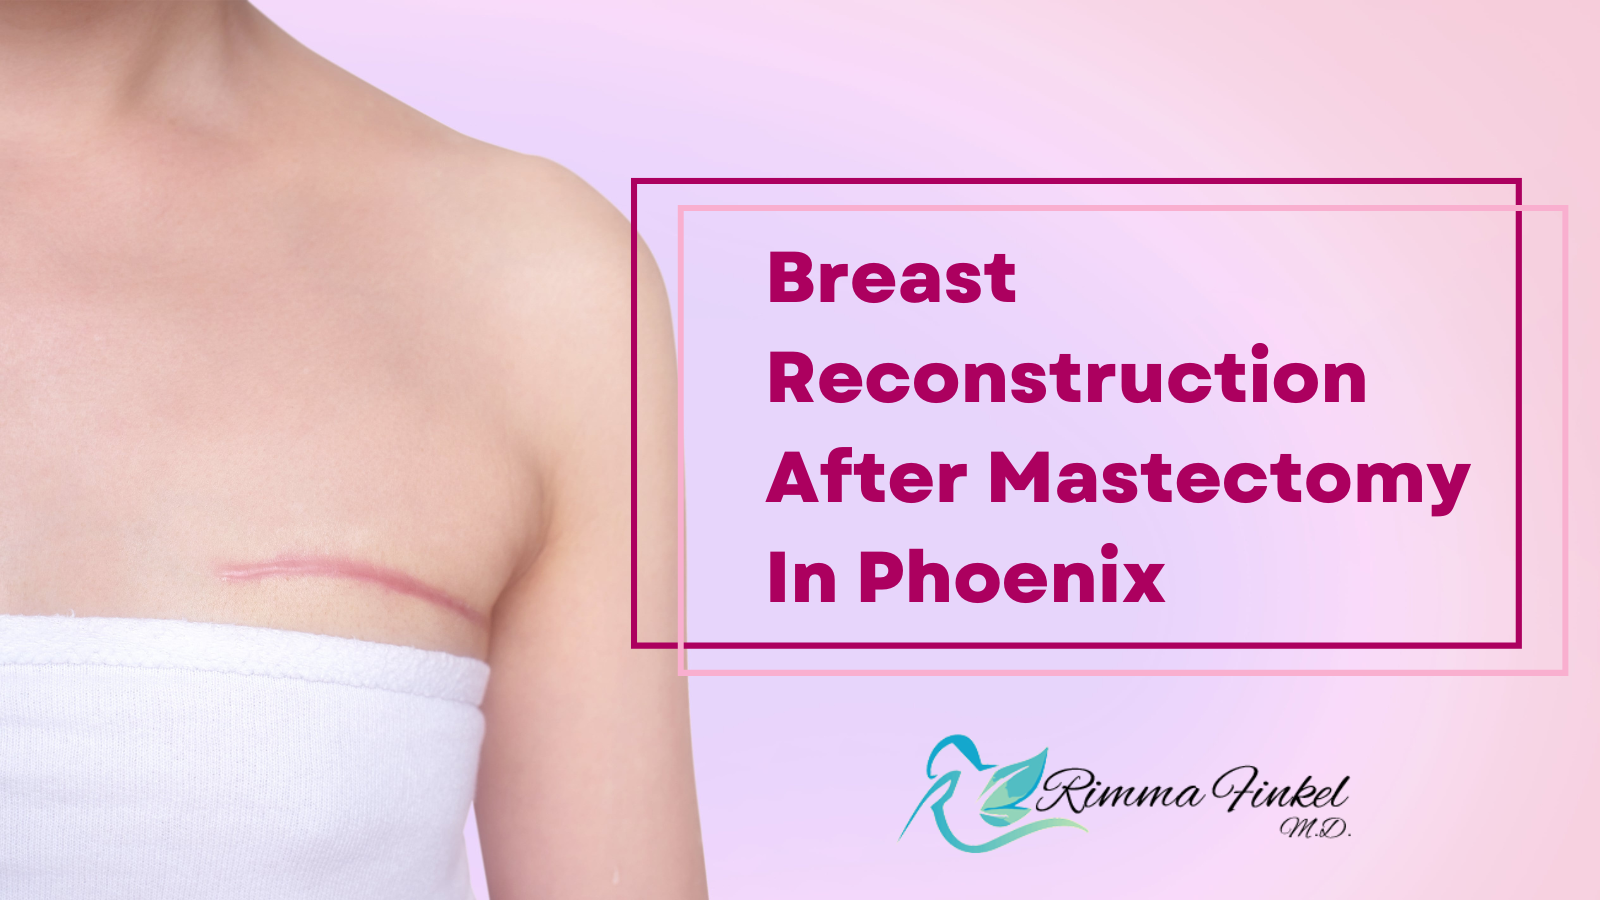 Breast Reconstruction After Mastectomy In Phoenix